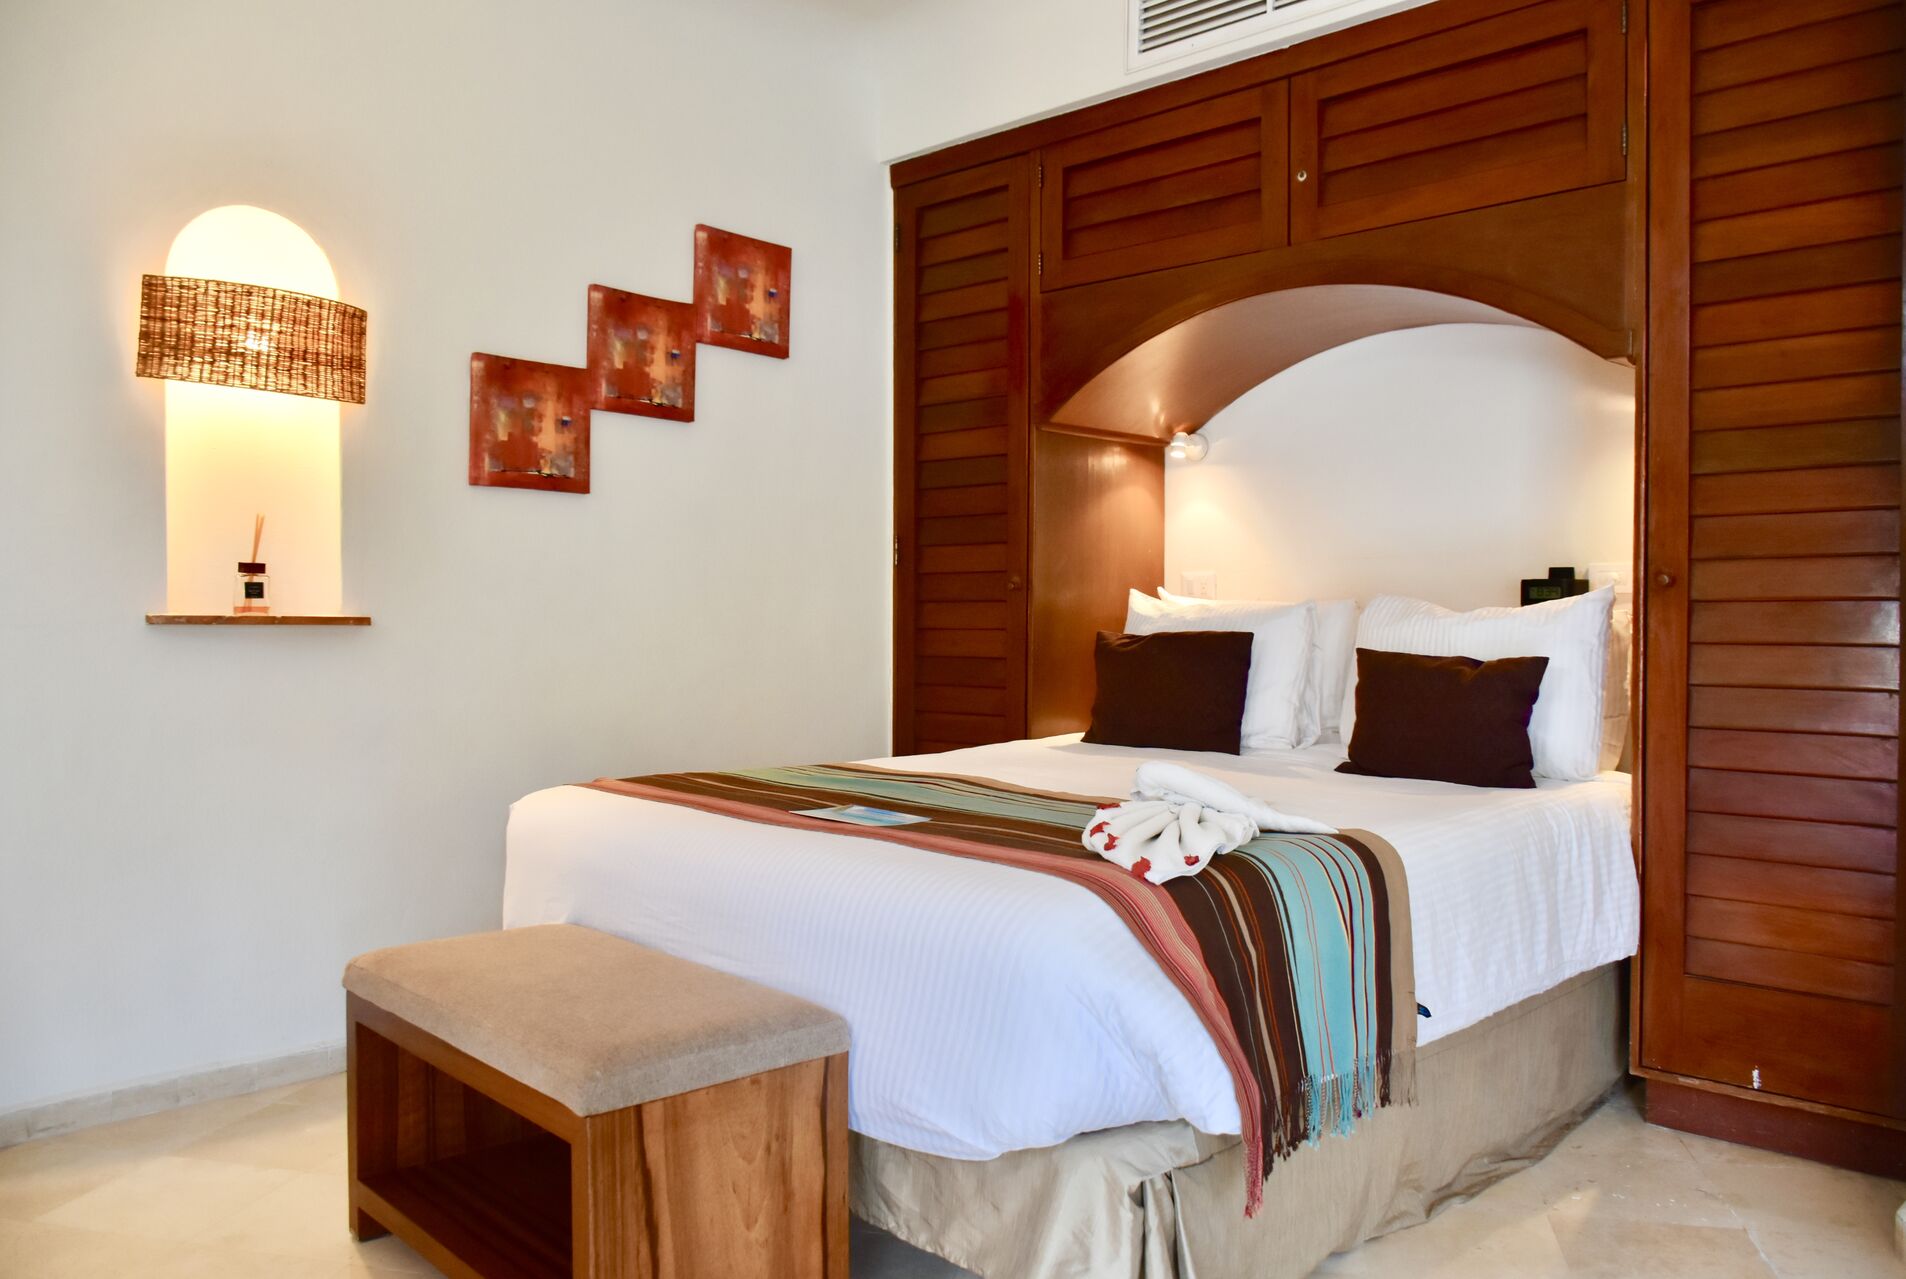 Fully furnished ocean view suite with queen size bed and kitchenette.